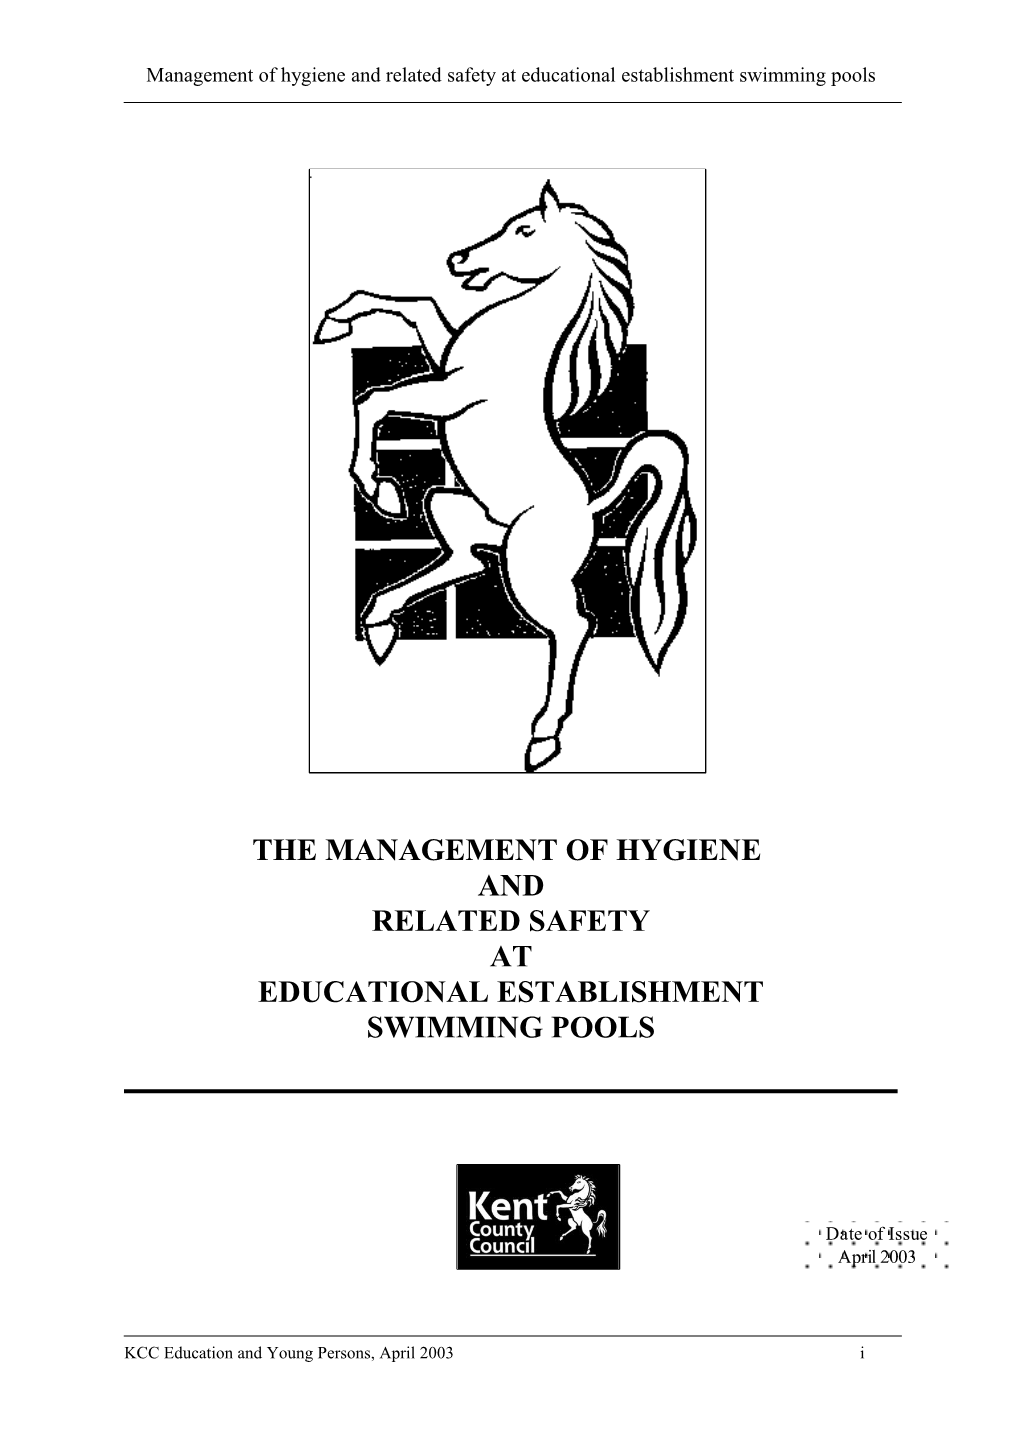 The Management of Hygiene and Related Safety at Educational Establishment - Swimming Pools